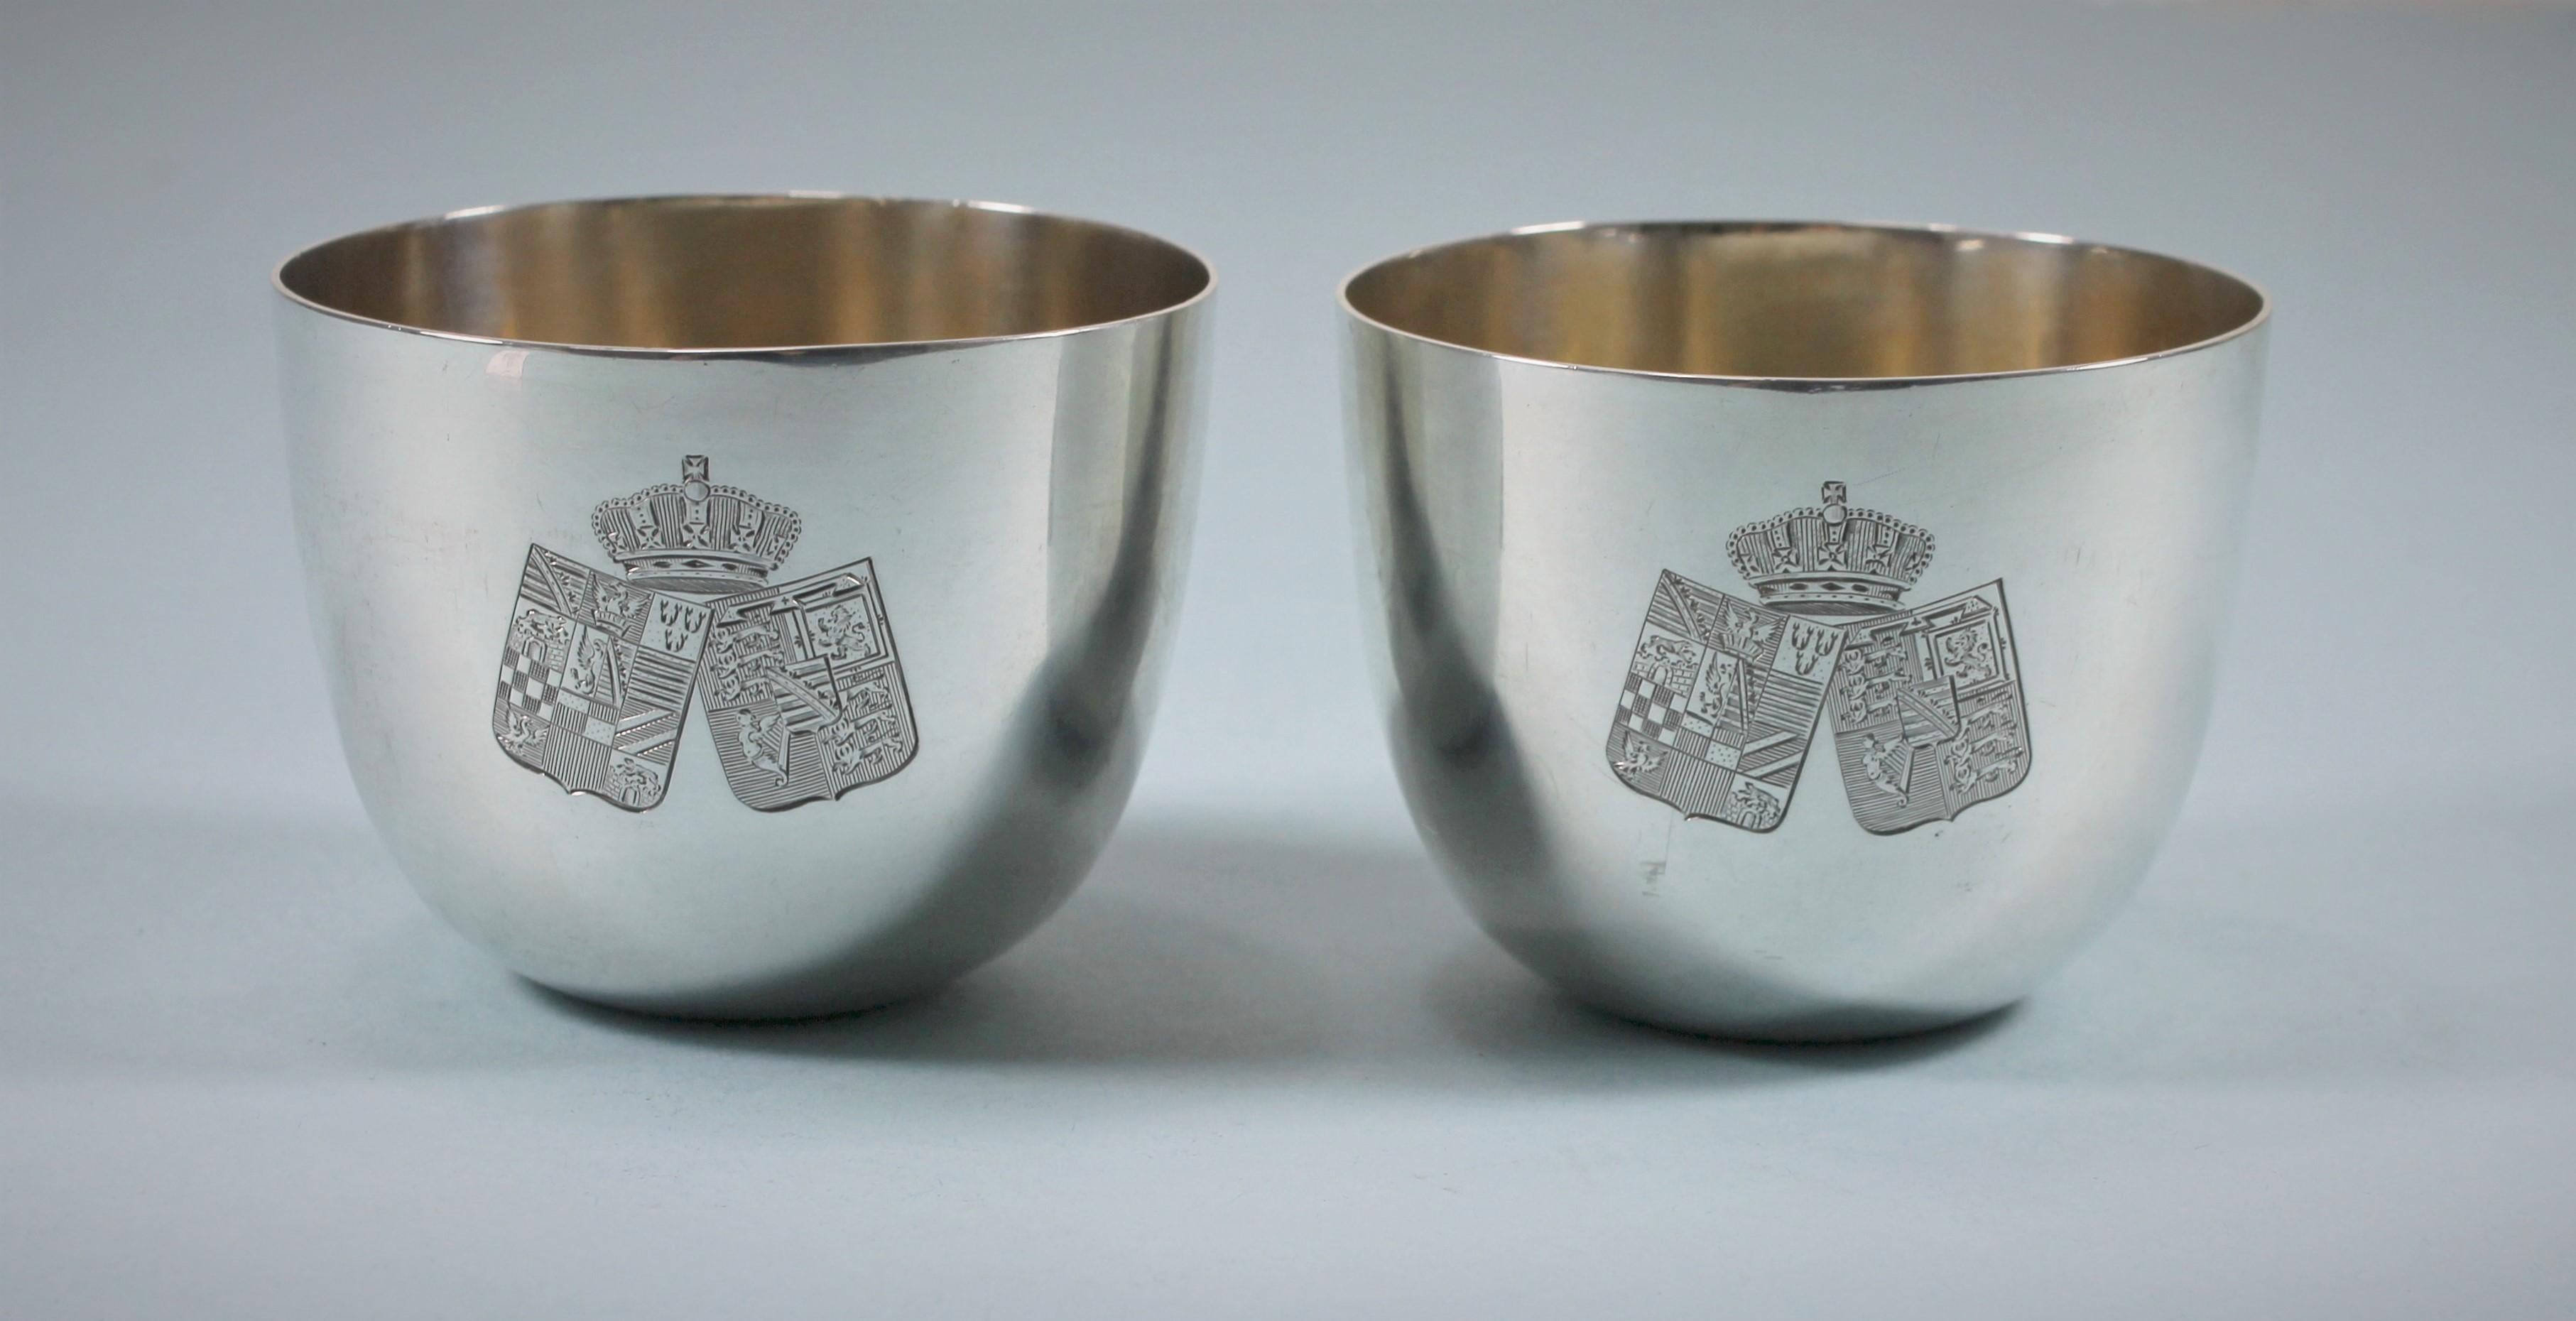 Attractive pair of Victorian sterling silver tumbler cups of good weight.
Makers: JAMES WAKELY & Frank CLARKE Wheeler. London 1891.
The cups are engraved on one side with two coats of arms surmounted by a Duke's Coronet.
On the opposite side